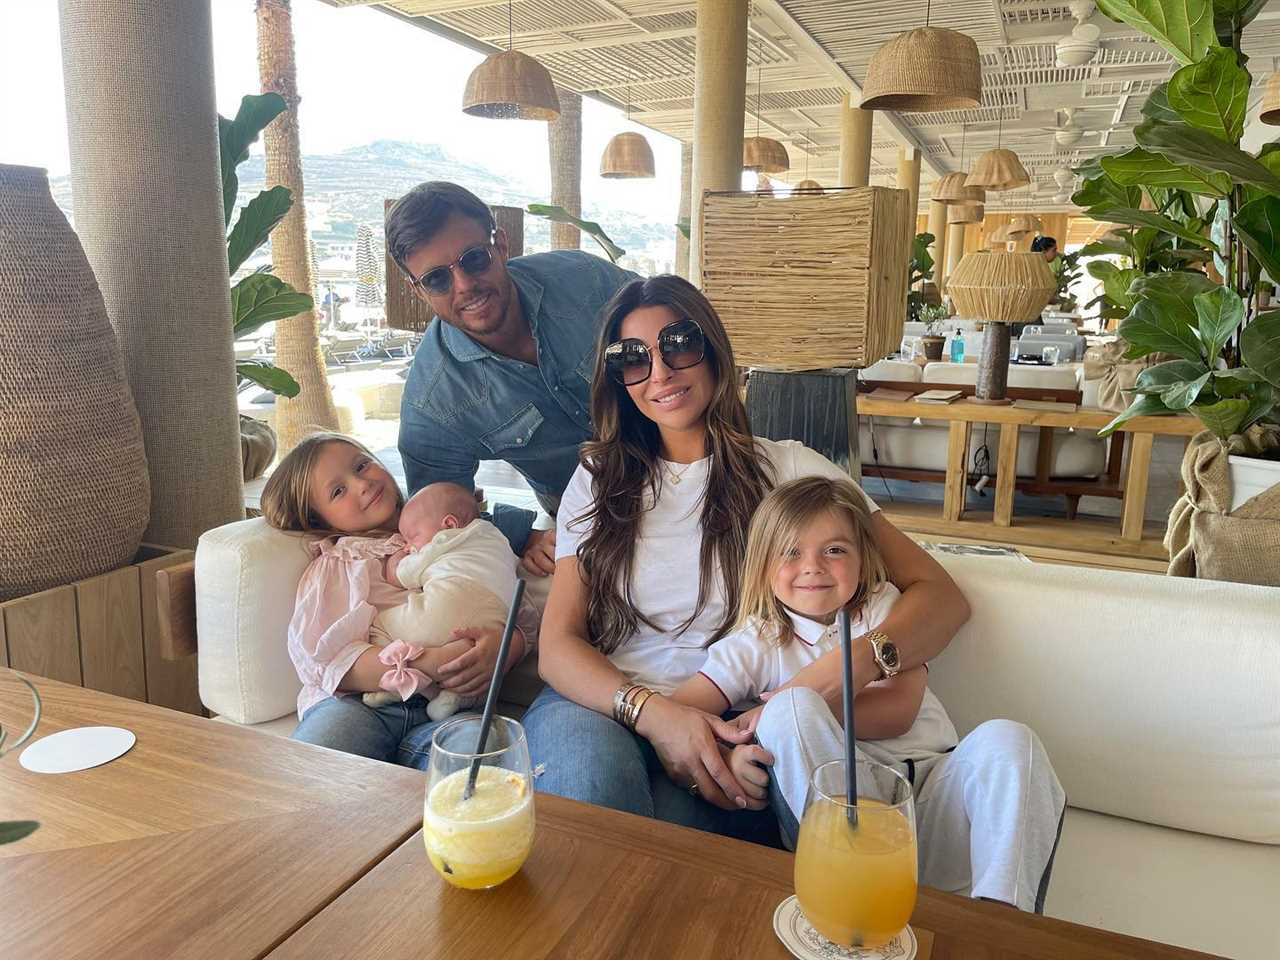 Towie legend reveals she’s engaged after having three kids with her partner